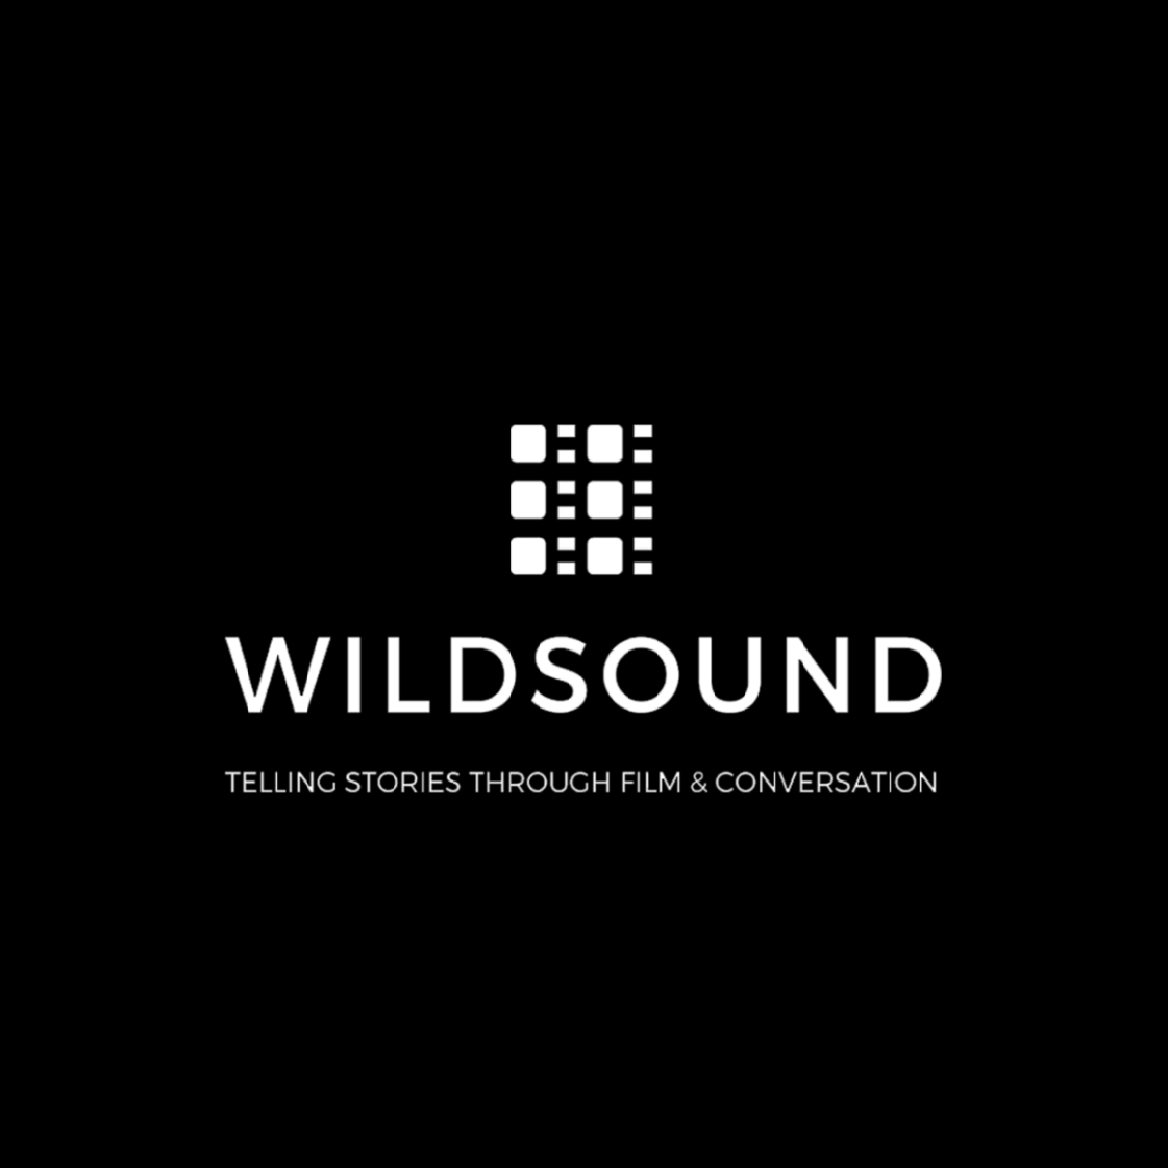 WILDsound, Thursday, May 19, 2022, Press release picture